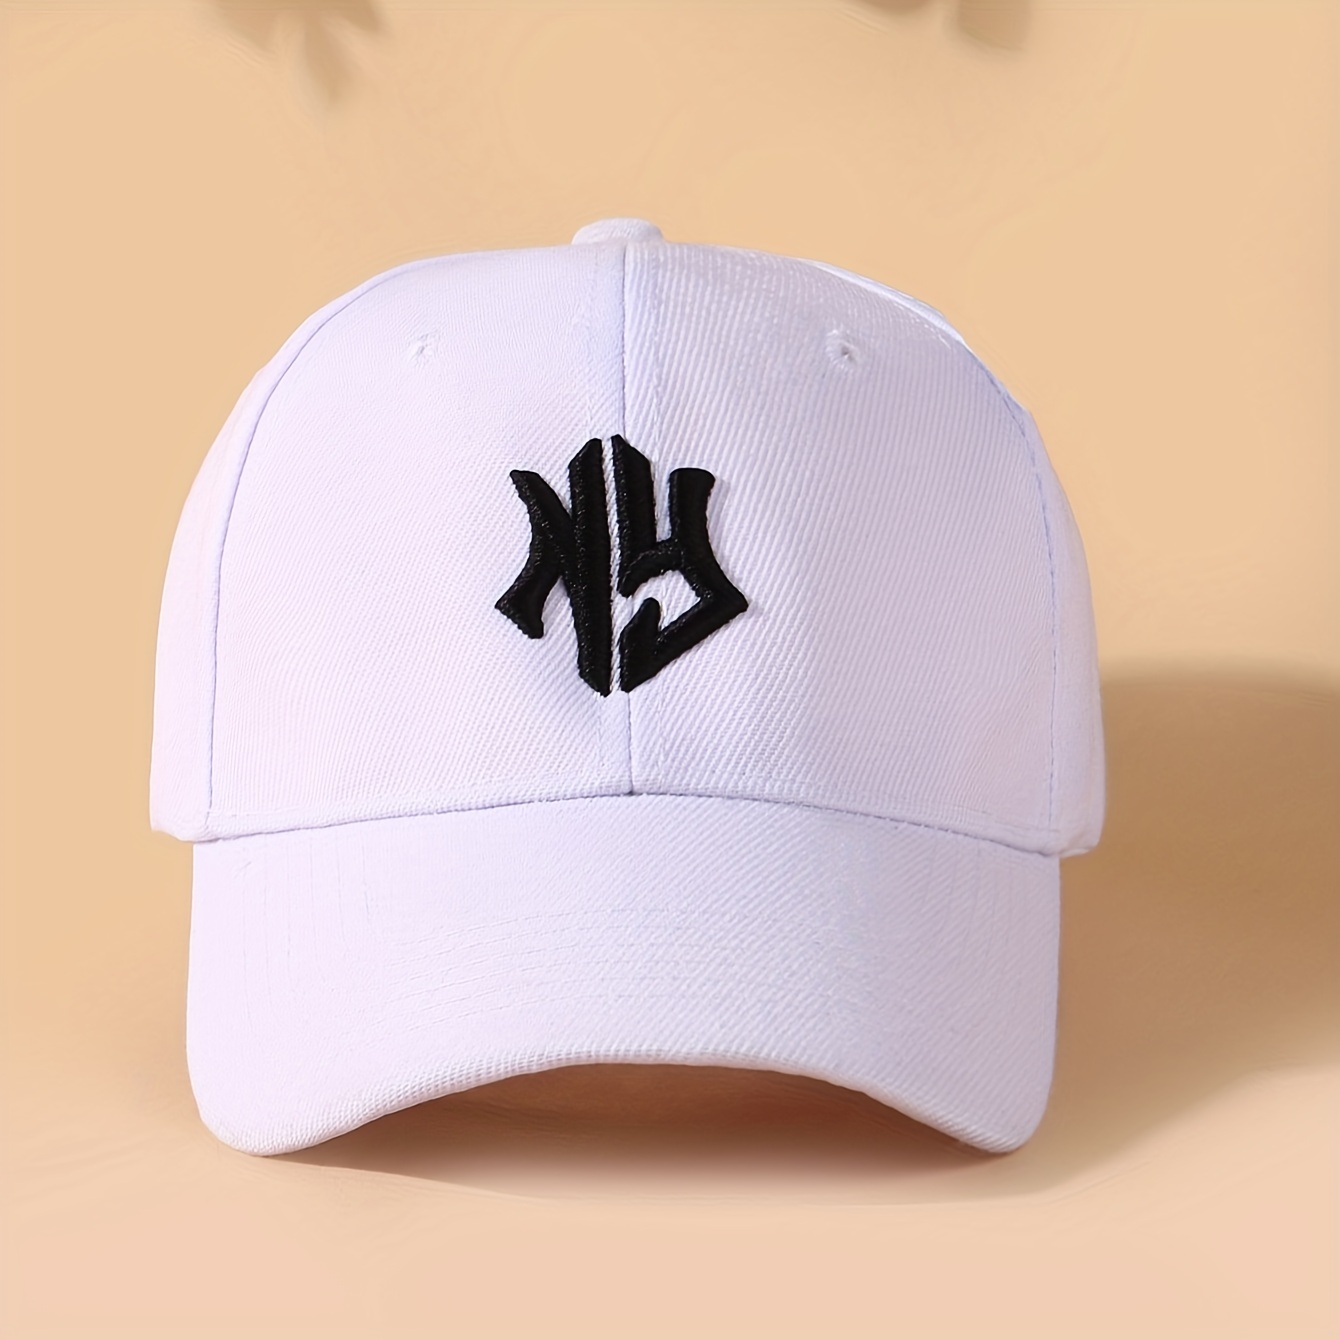 

1pc Fashionable 3d Embroidery Truck Driver Baseball With Letter Embroidery Cap For Outdoor Sports, Running, Best Gift For Couples, Parents, And Adults.